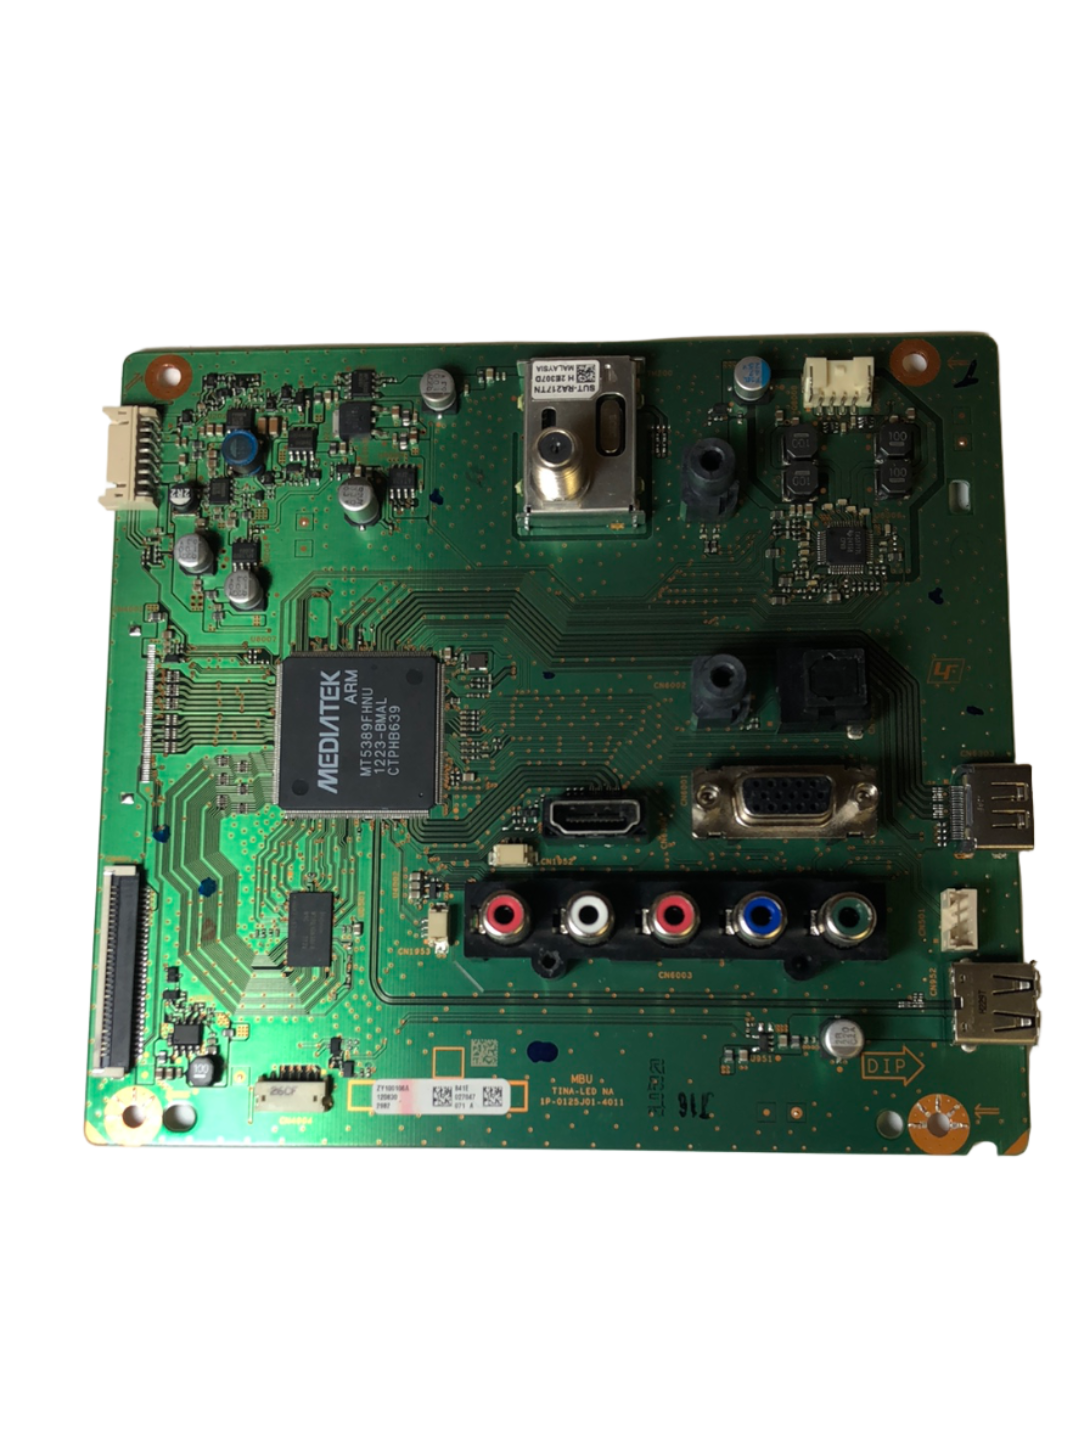 Sony 1-895-285-11 Main A Board for KDL-32EX340